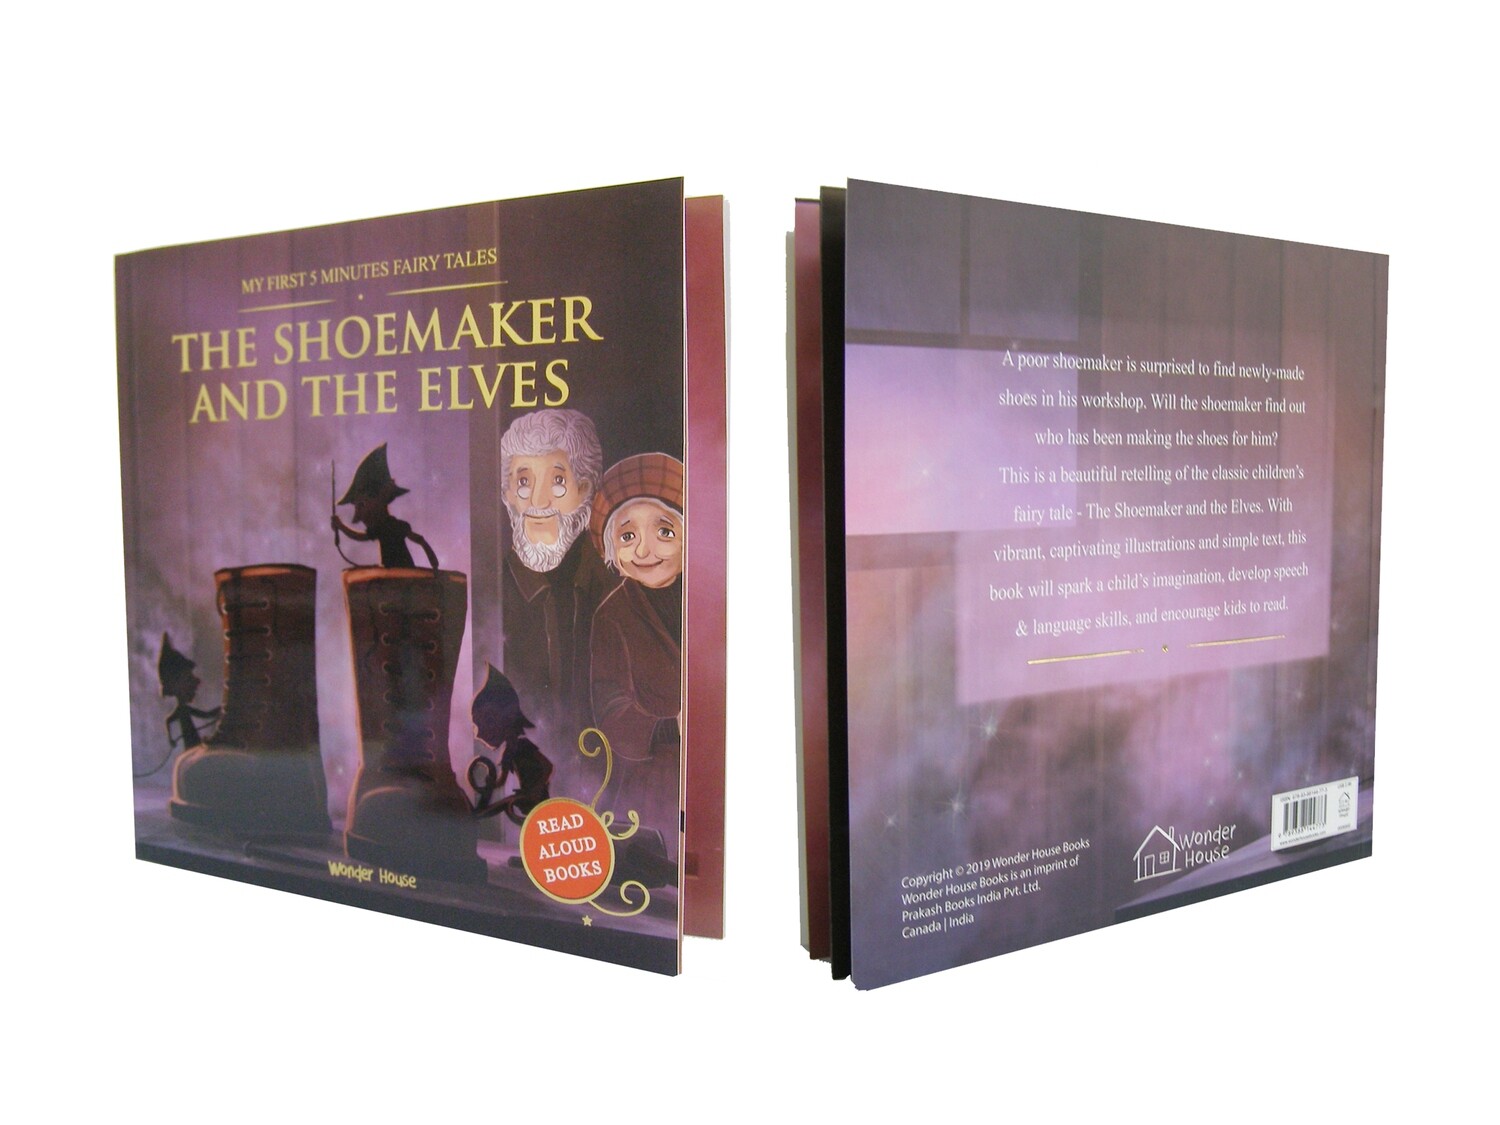 THE SHOEMAKER AND THE ELVES - MY FIRST 5 MINUTES FAIRY TALES BOOK